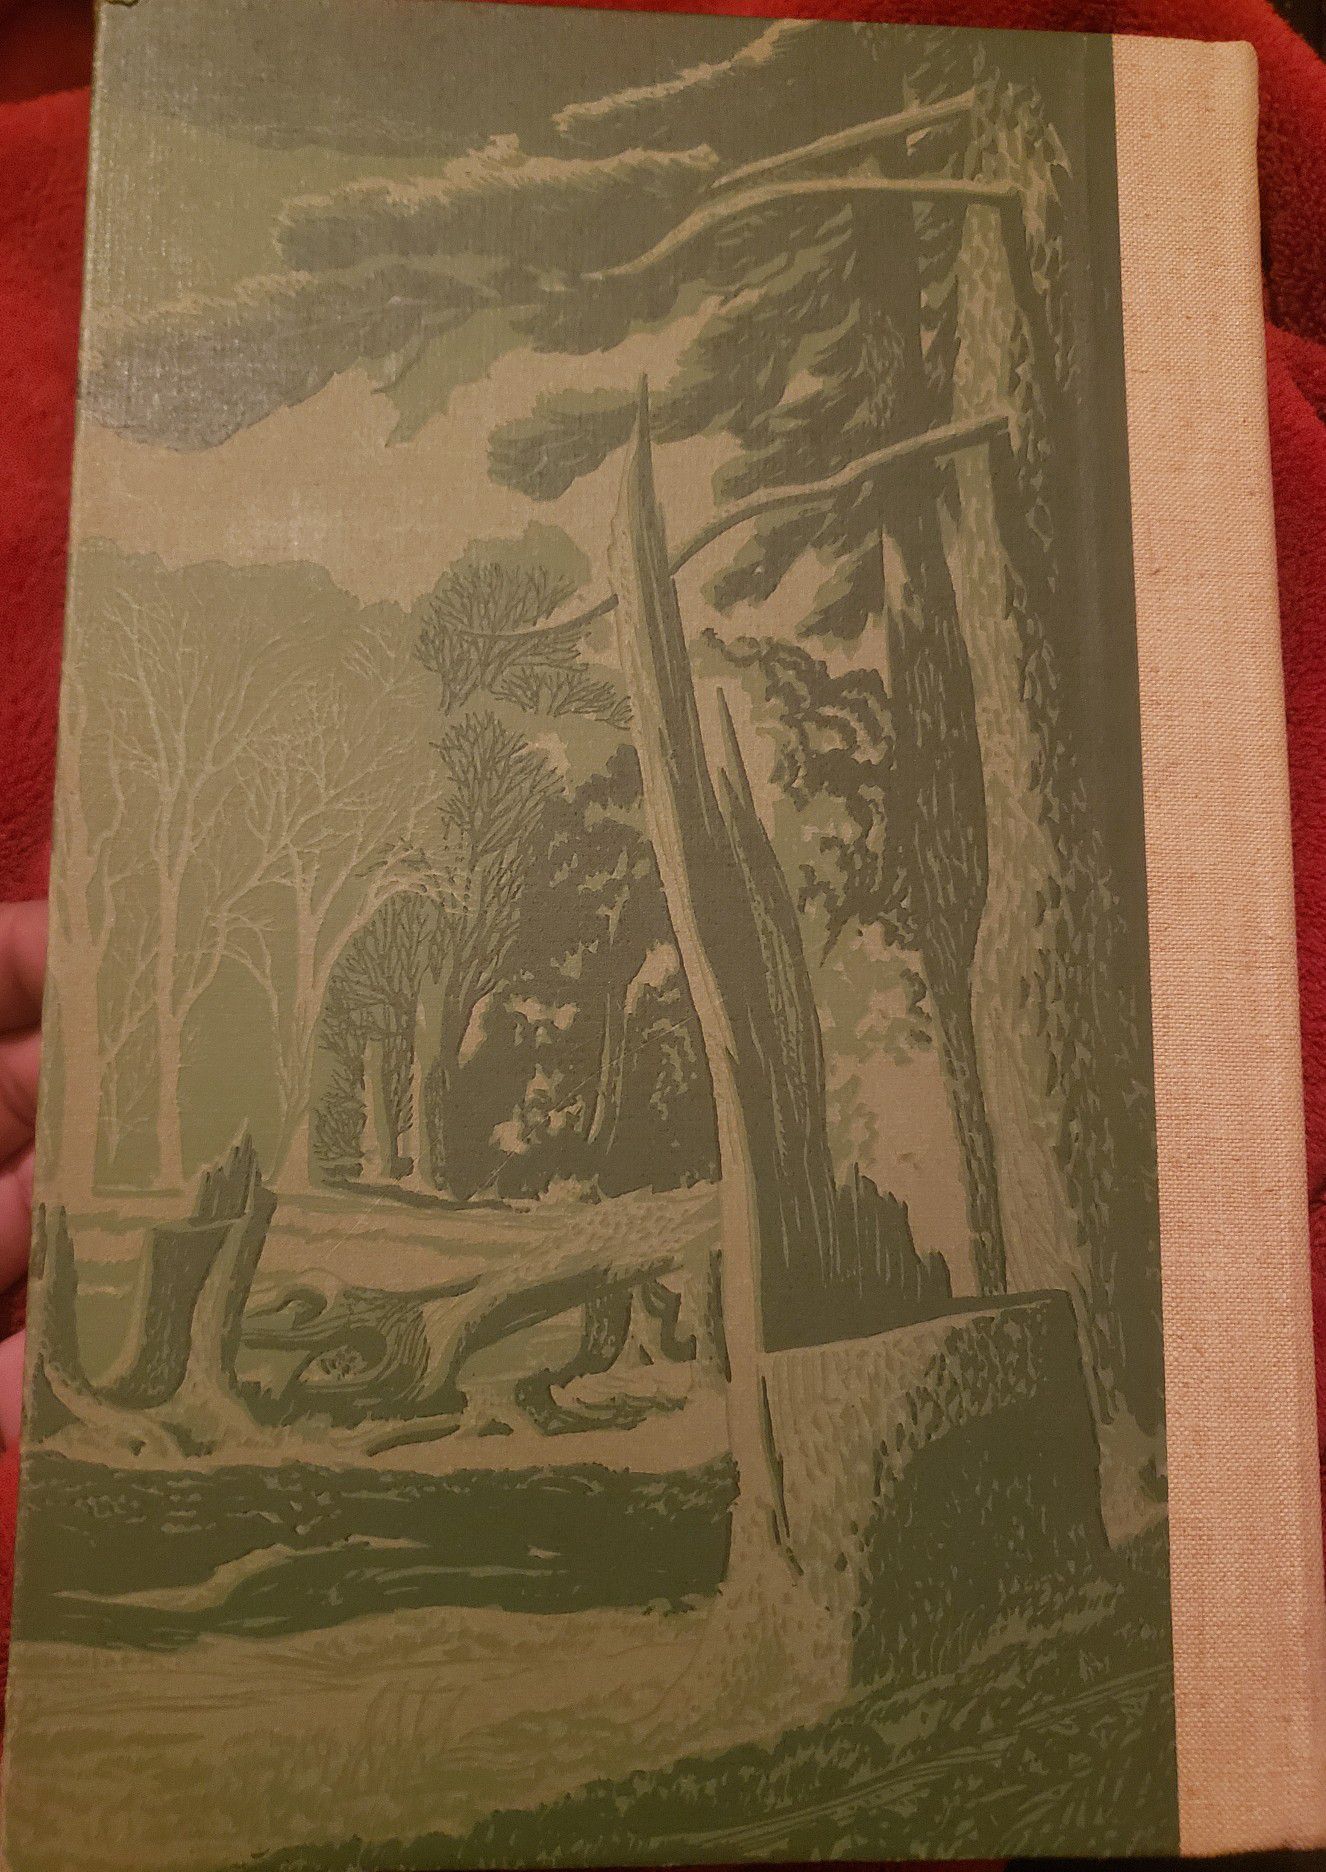 Walden Illustrated Edition (1940s)